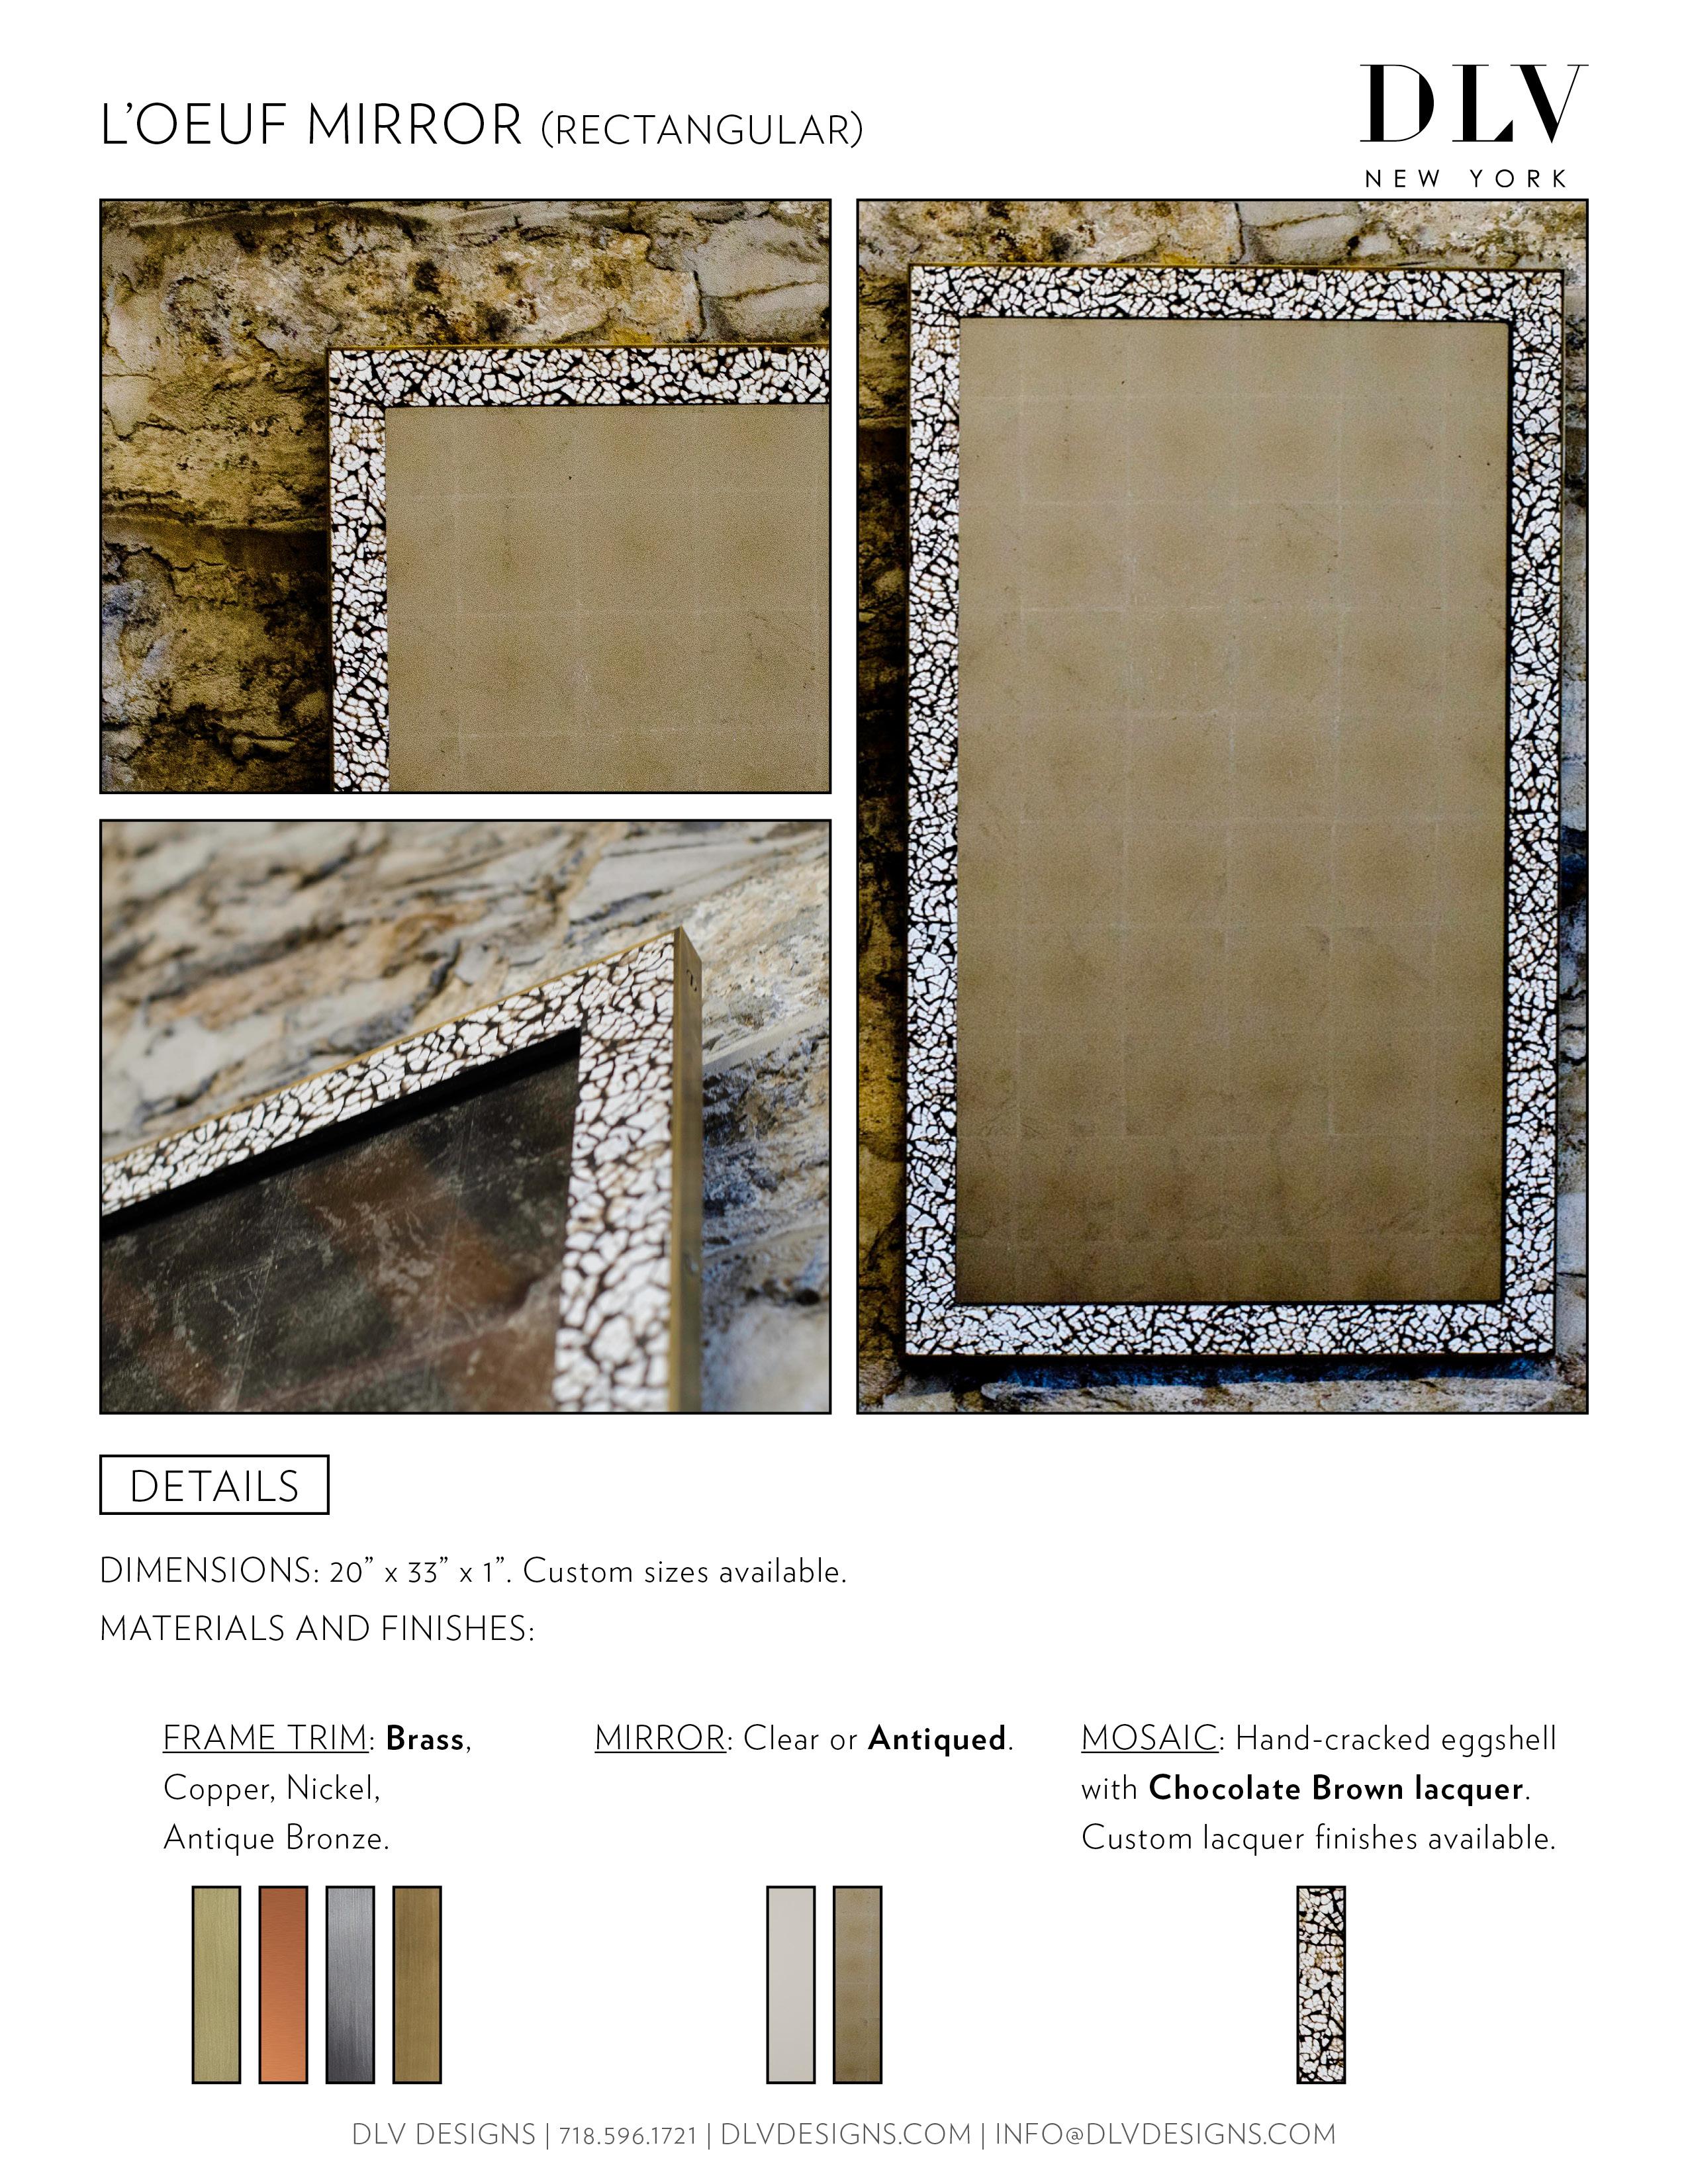 Hand-cracked eggshell and lacquer frame, trimmed in brass or antique bronze. Églomisé mirror available.
Dimensions: 20